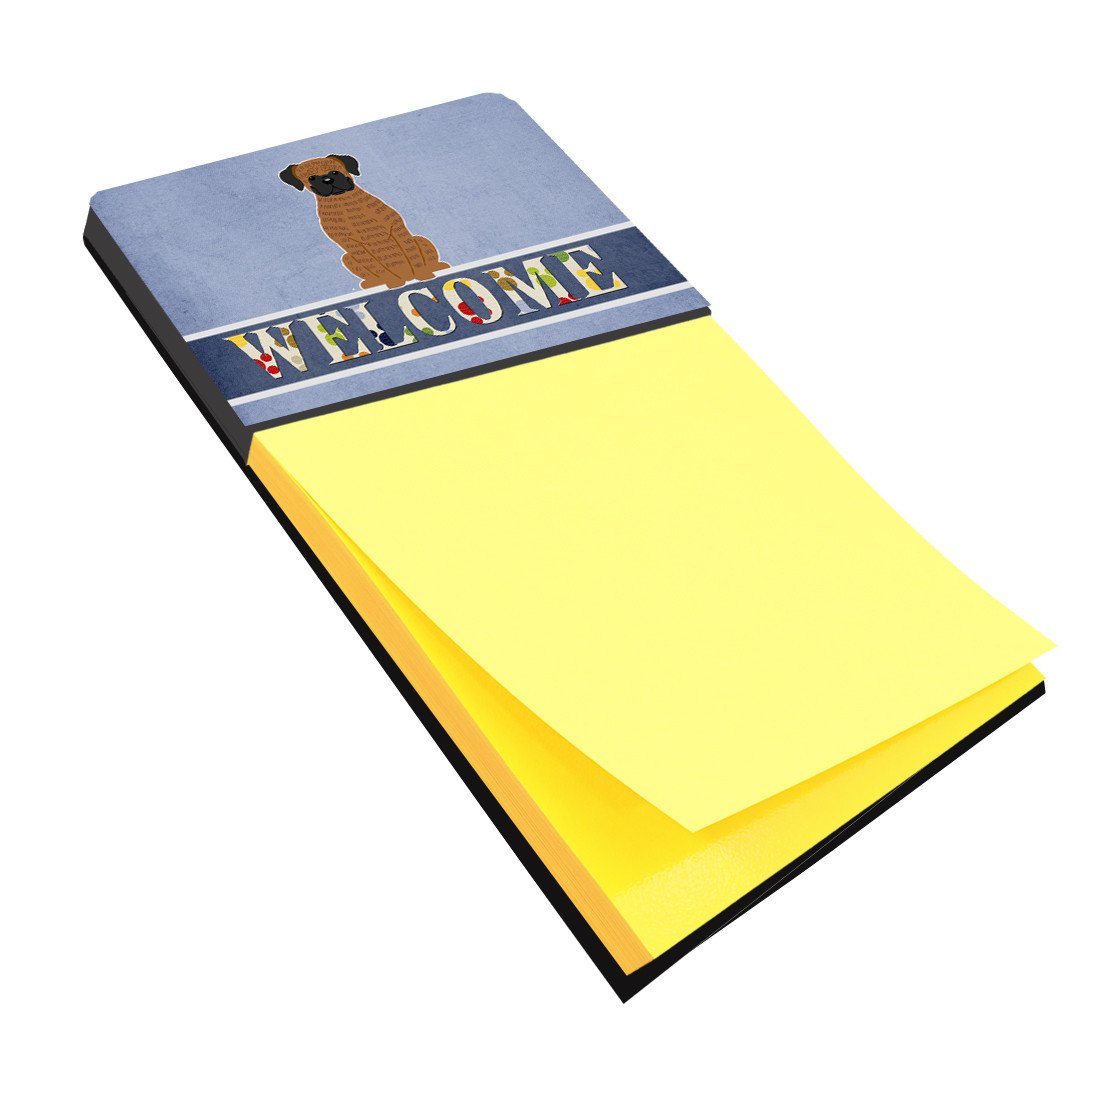 Brindle Boxer Welcome Sticky Note Holder BB5698SN by Caroline's Treasures